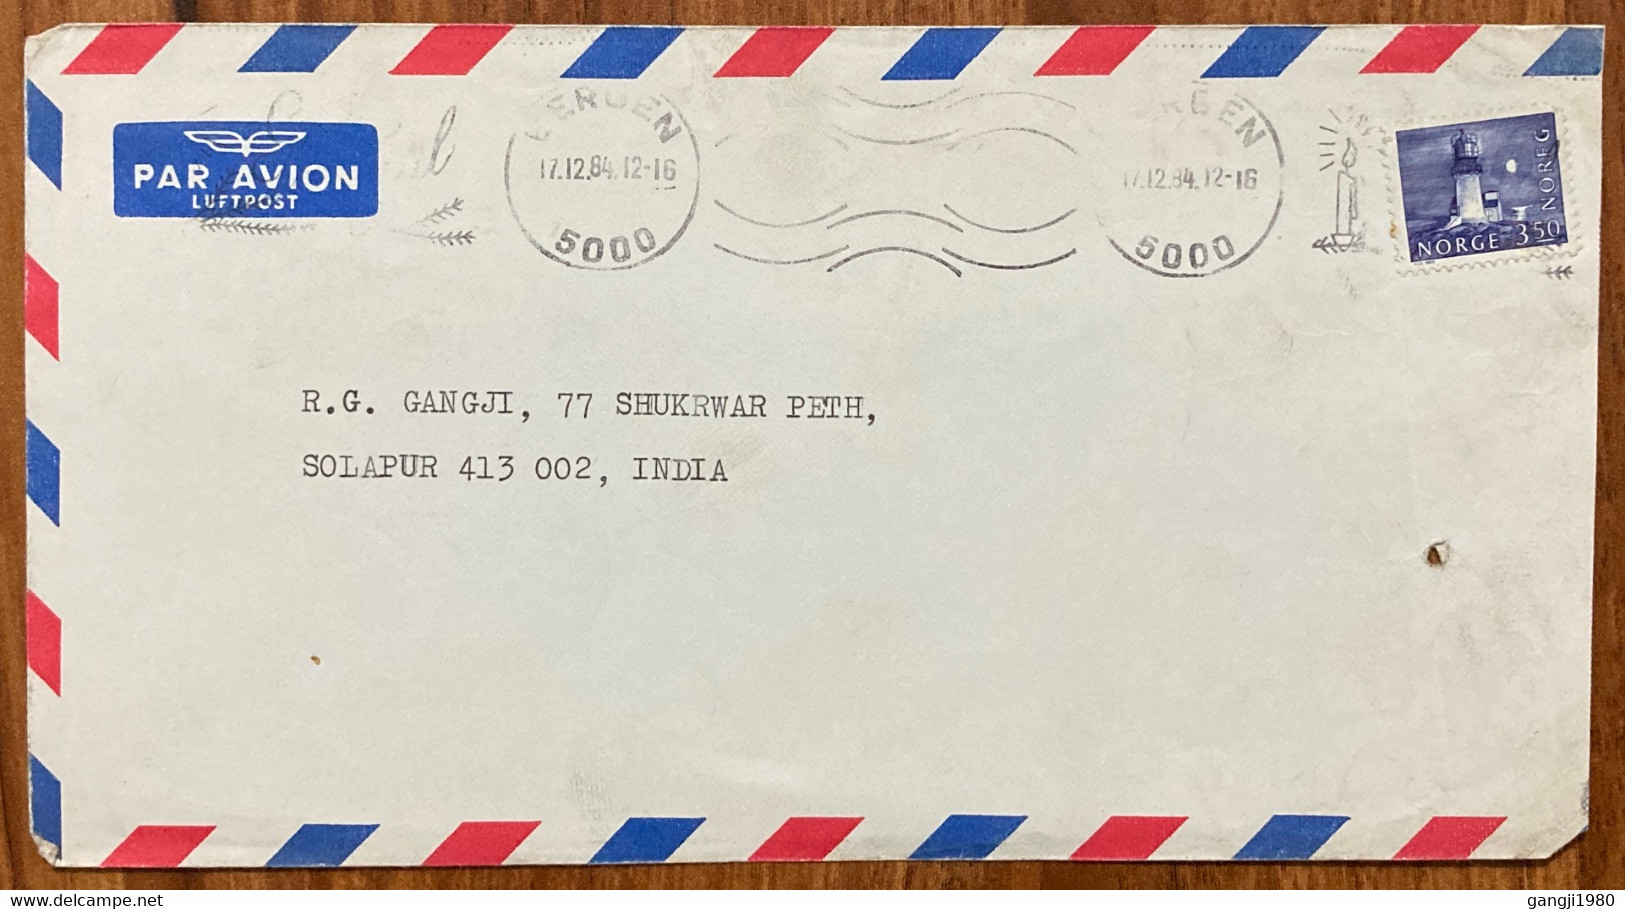 NORWAY,1984, AIR MAIL COVER TO INDIA, BERGEN CITY, CANDLE PICTURE, ROLLAR WAVY CANCELLATION, LIGHT HOUSE STAMP. - Lettres & Documents